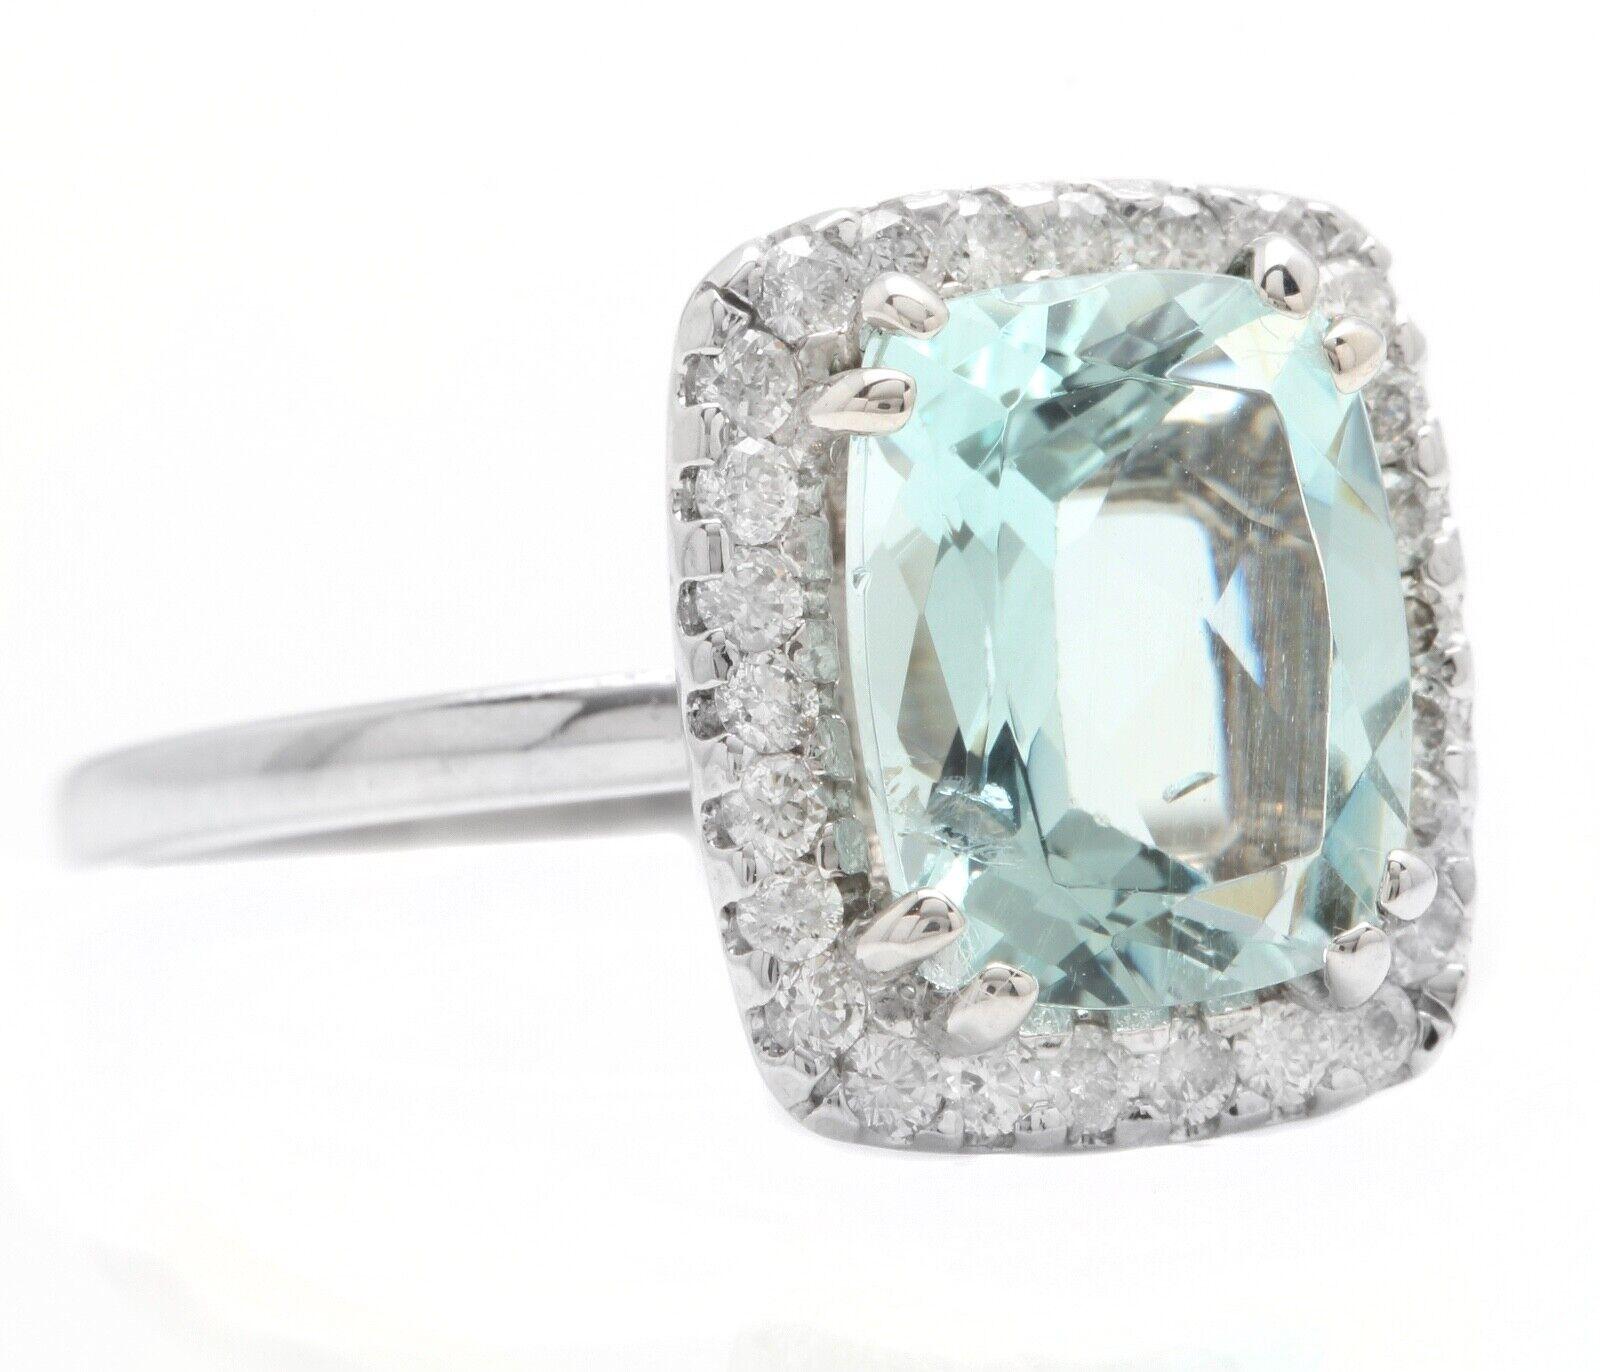 3.15 Carats Natural Aquamarine and Diamond 14K Solid White Gold Ring

Suggested Replacement Value: Approx. $4,000.00

Total Natural Cushion Aquamarine Weights: Approx. 2.80 Carats 

Aquamarine Measures: Approx. 10.00 x 8.00mm

Aquamarine Treatment: